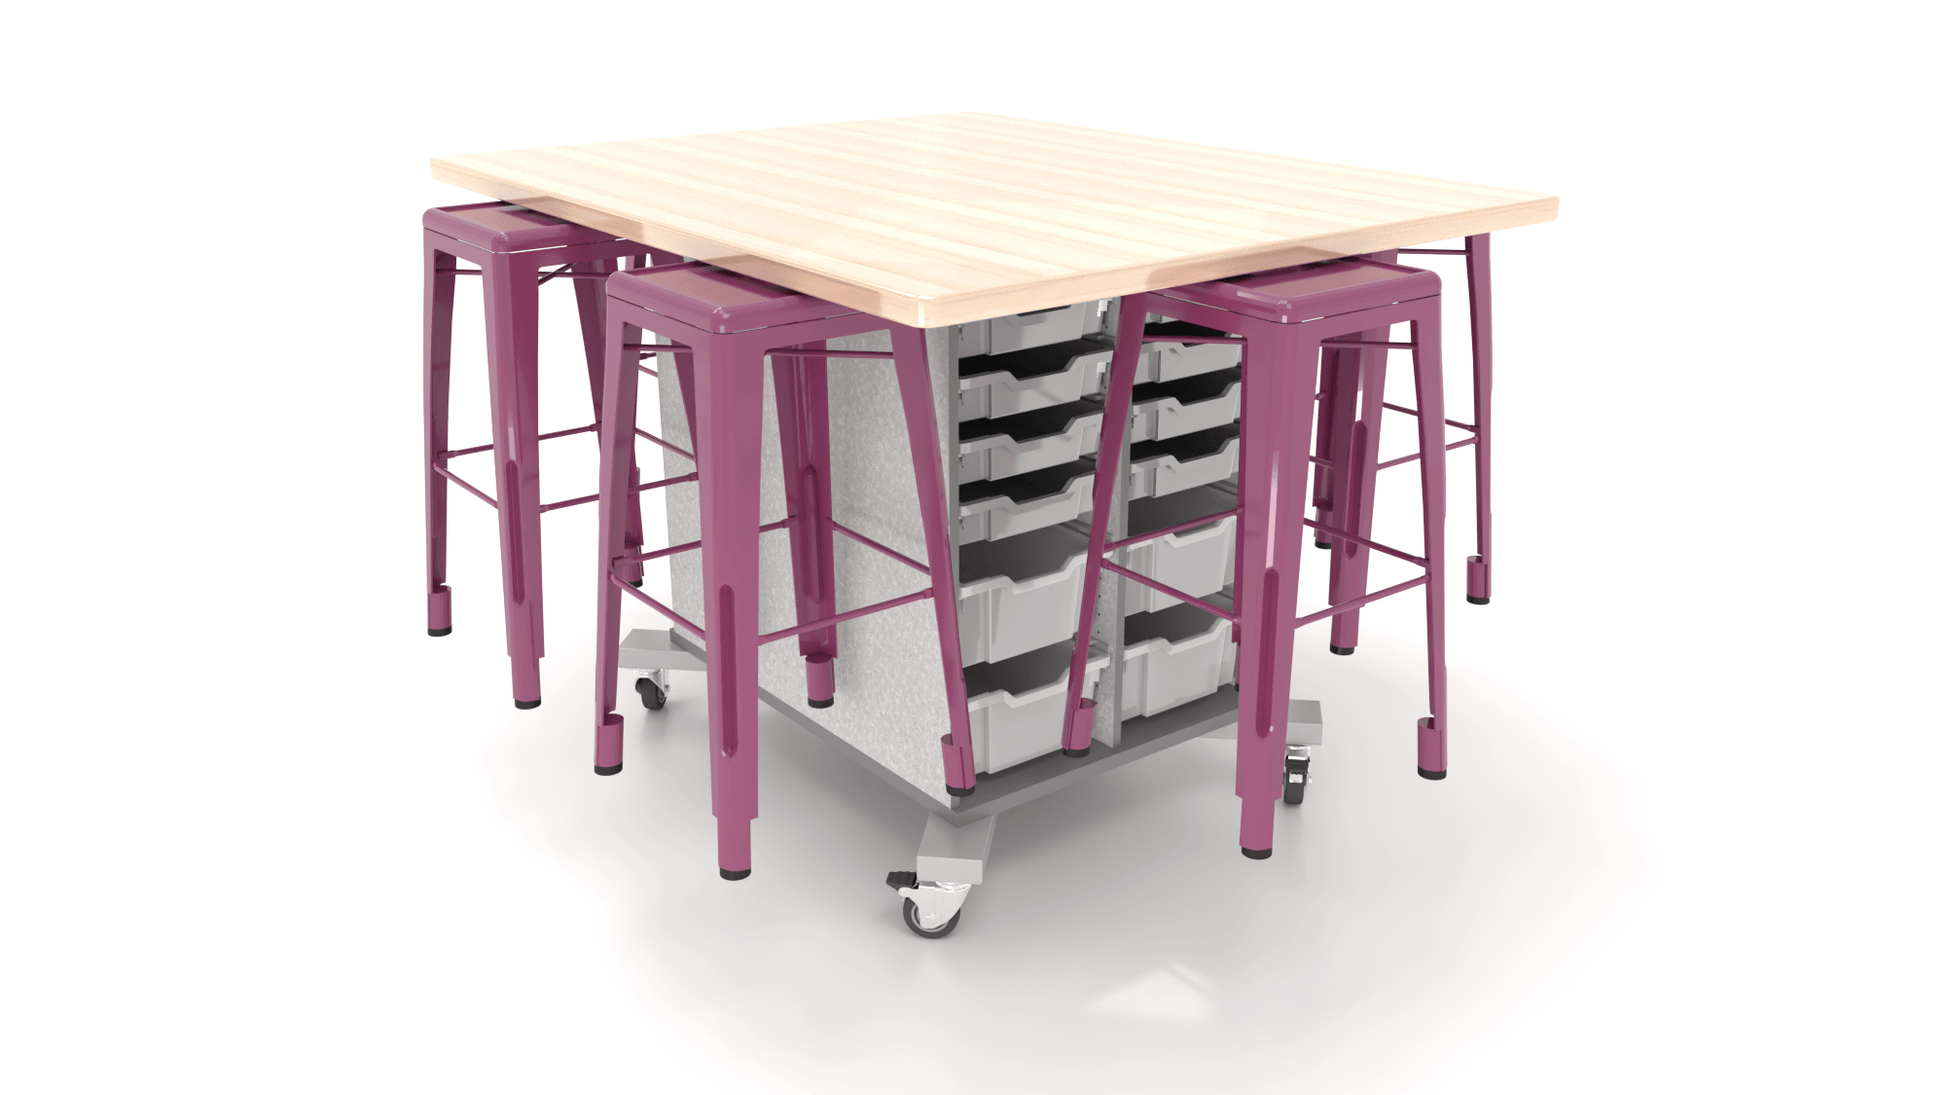 CEF Hideaway Storage Table 42"H - Double Sided 24 Bin Storage Cart and a Solid Maple Butcher Block Top 49"W x 60"D with 6 Metal Stools Included - SchoolOutlet